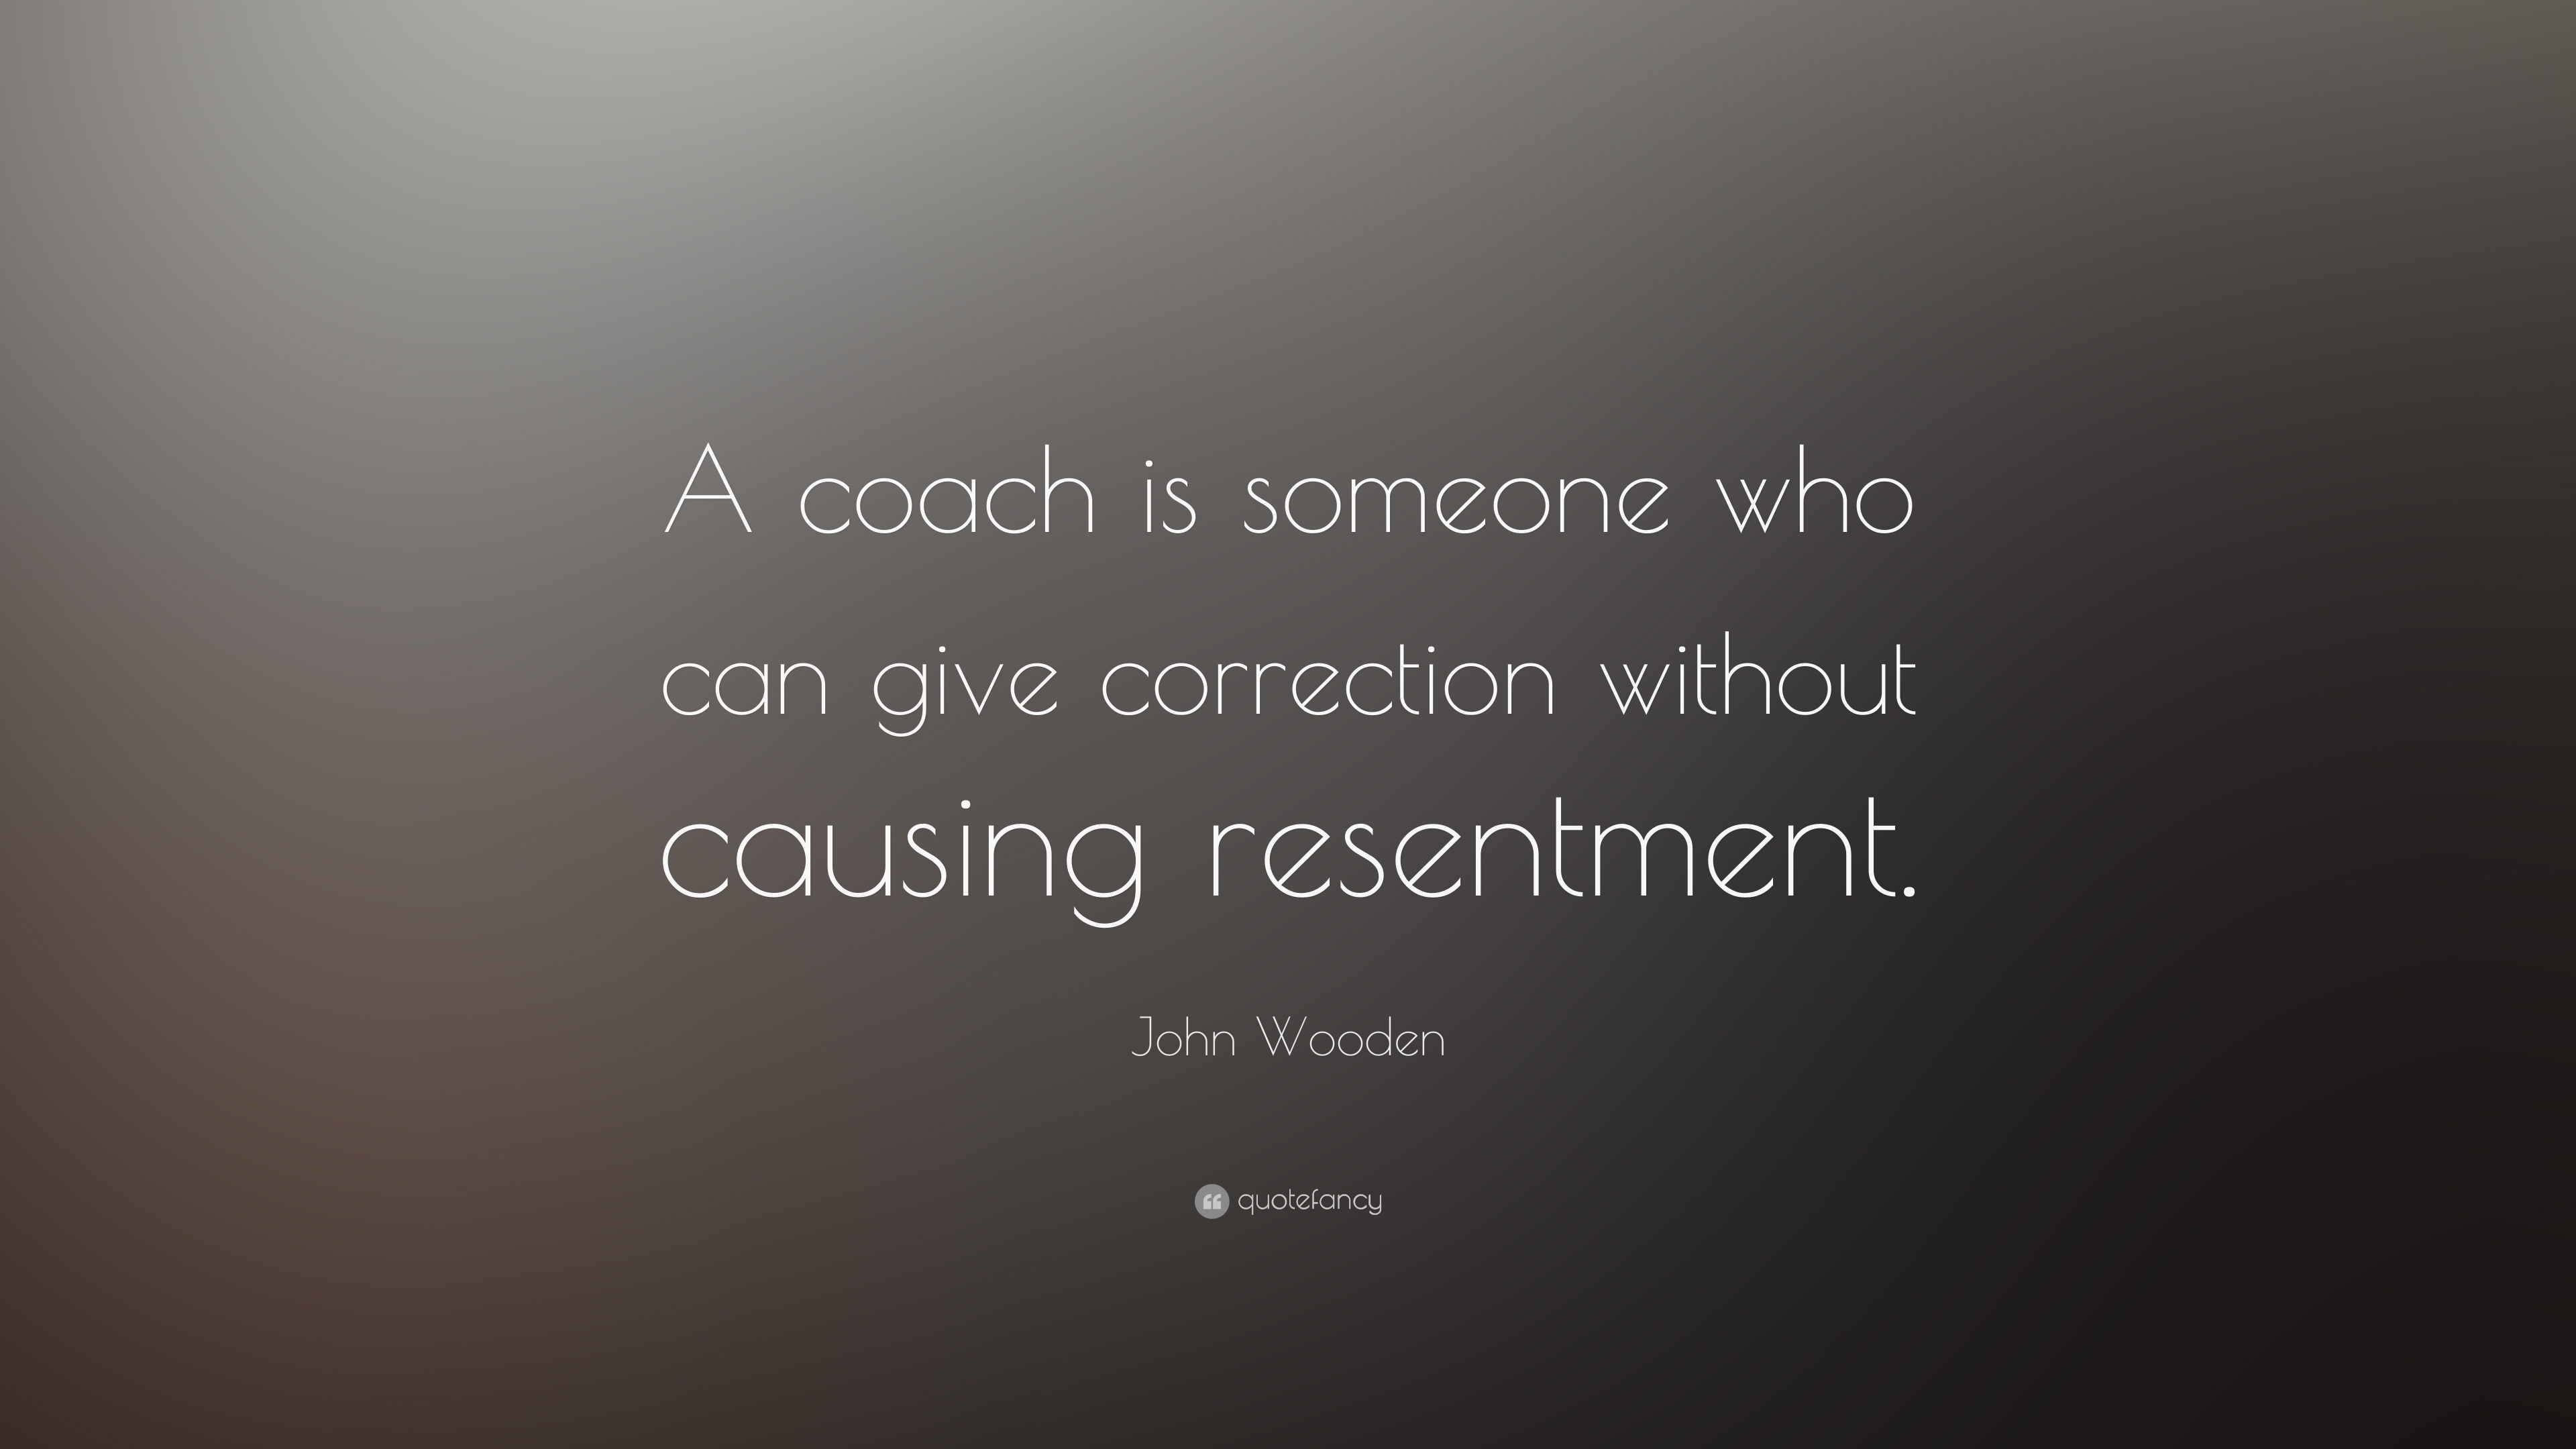 John Wooden Quote - Keeping Things Simple Quotes - HD Wallpaper 